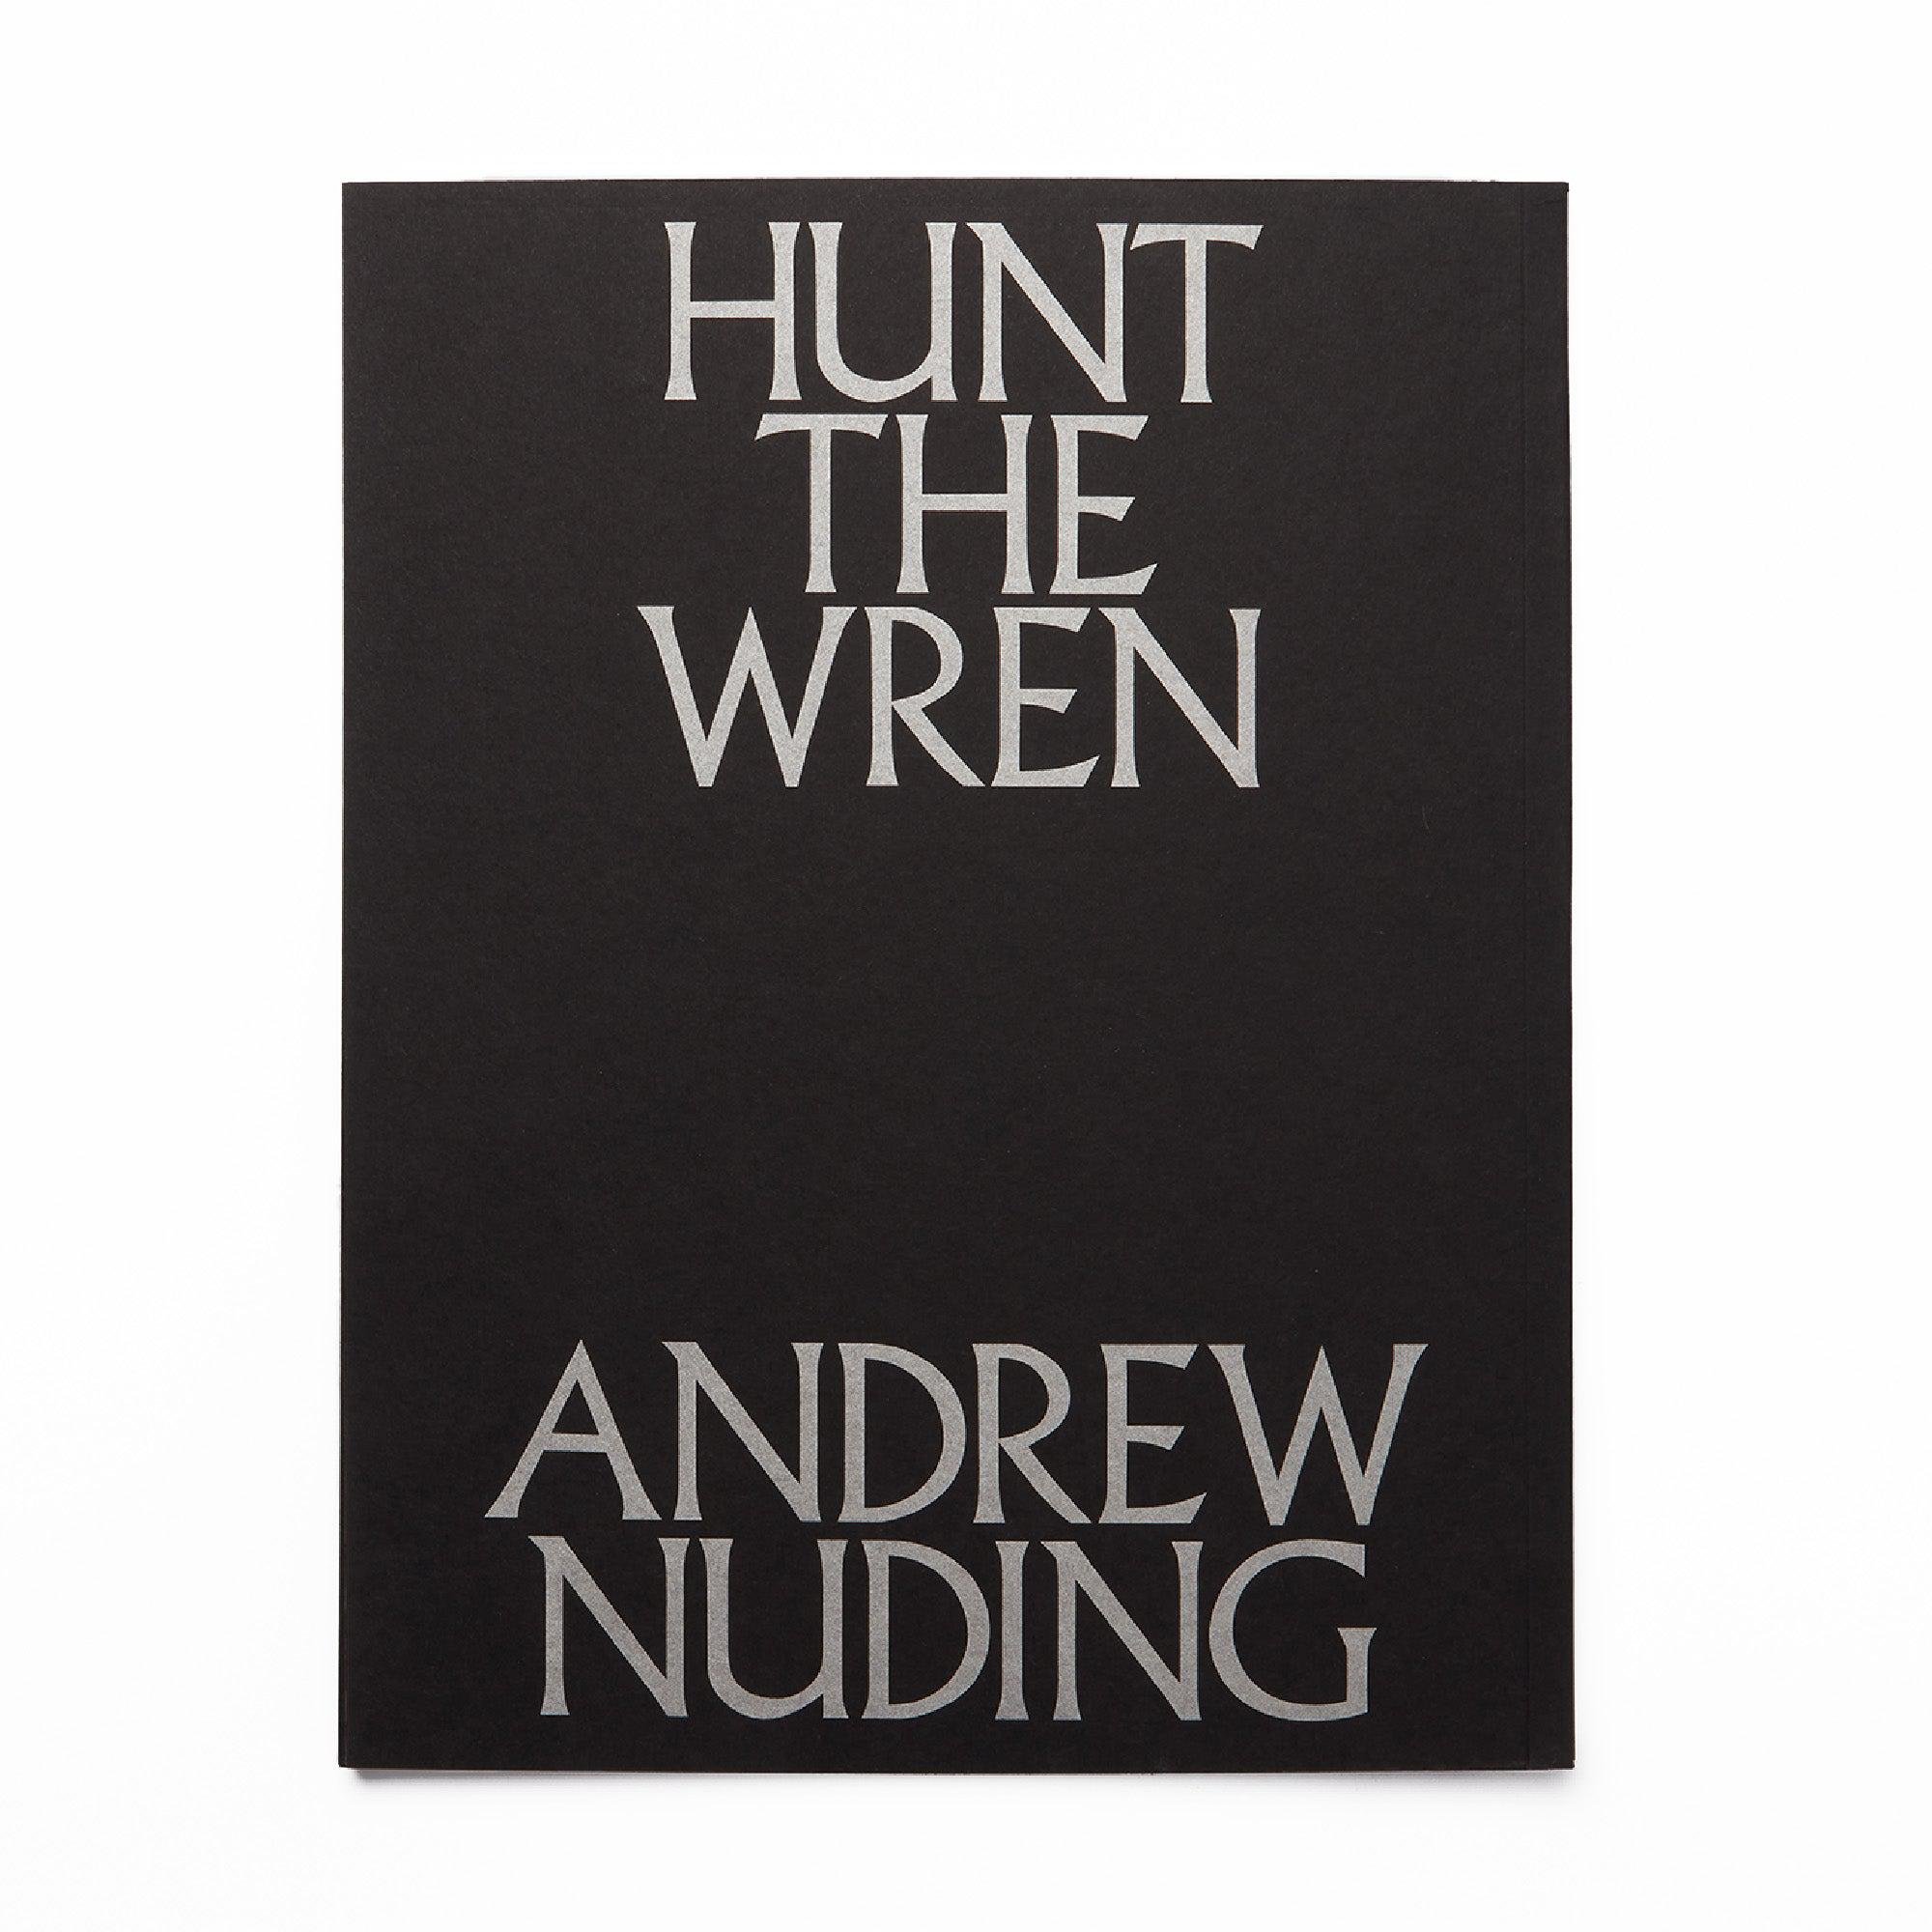 Andrew Nuding - HUNT THE WREN by ANDREW NUDING